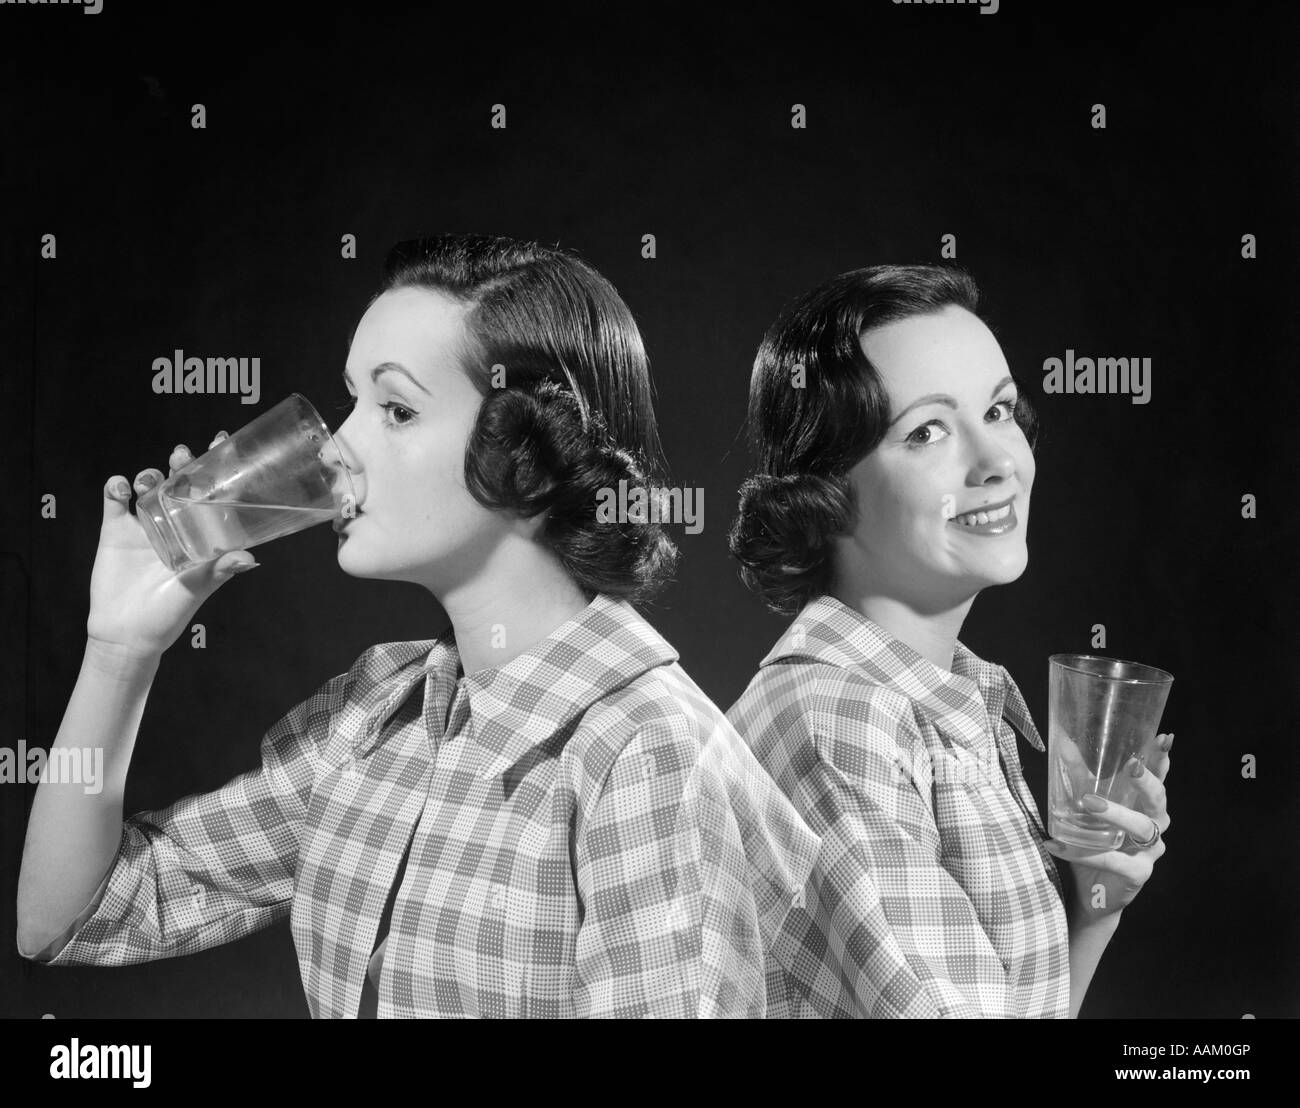 1950s 1960s DOUBLE EXPOSURE OF A WOMAN IN CHECKERED SHIRT DRINKING FROM A GLASS & SMILING AFTERWARD LOOKING AT CAMERA Stock Photo